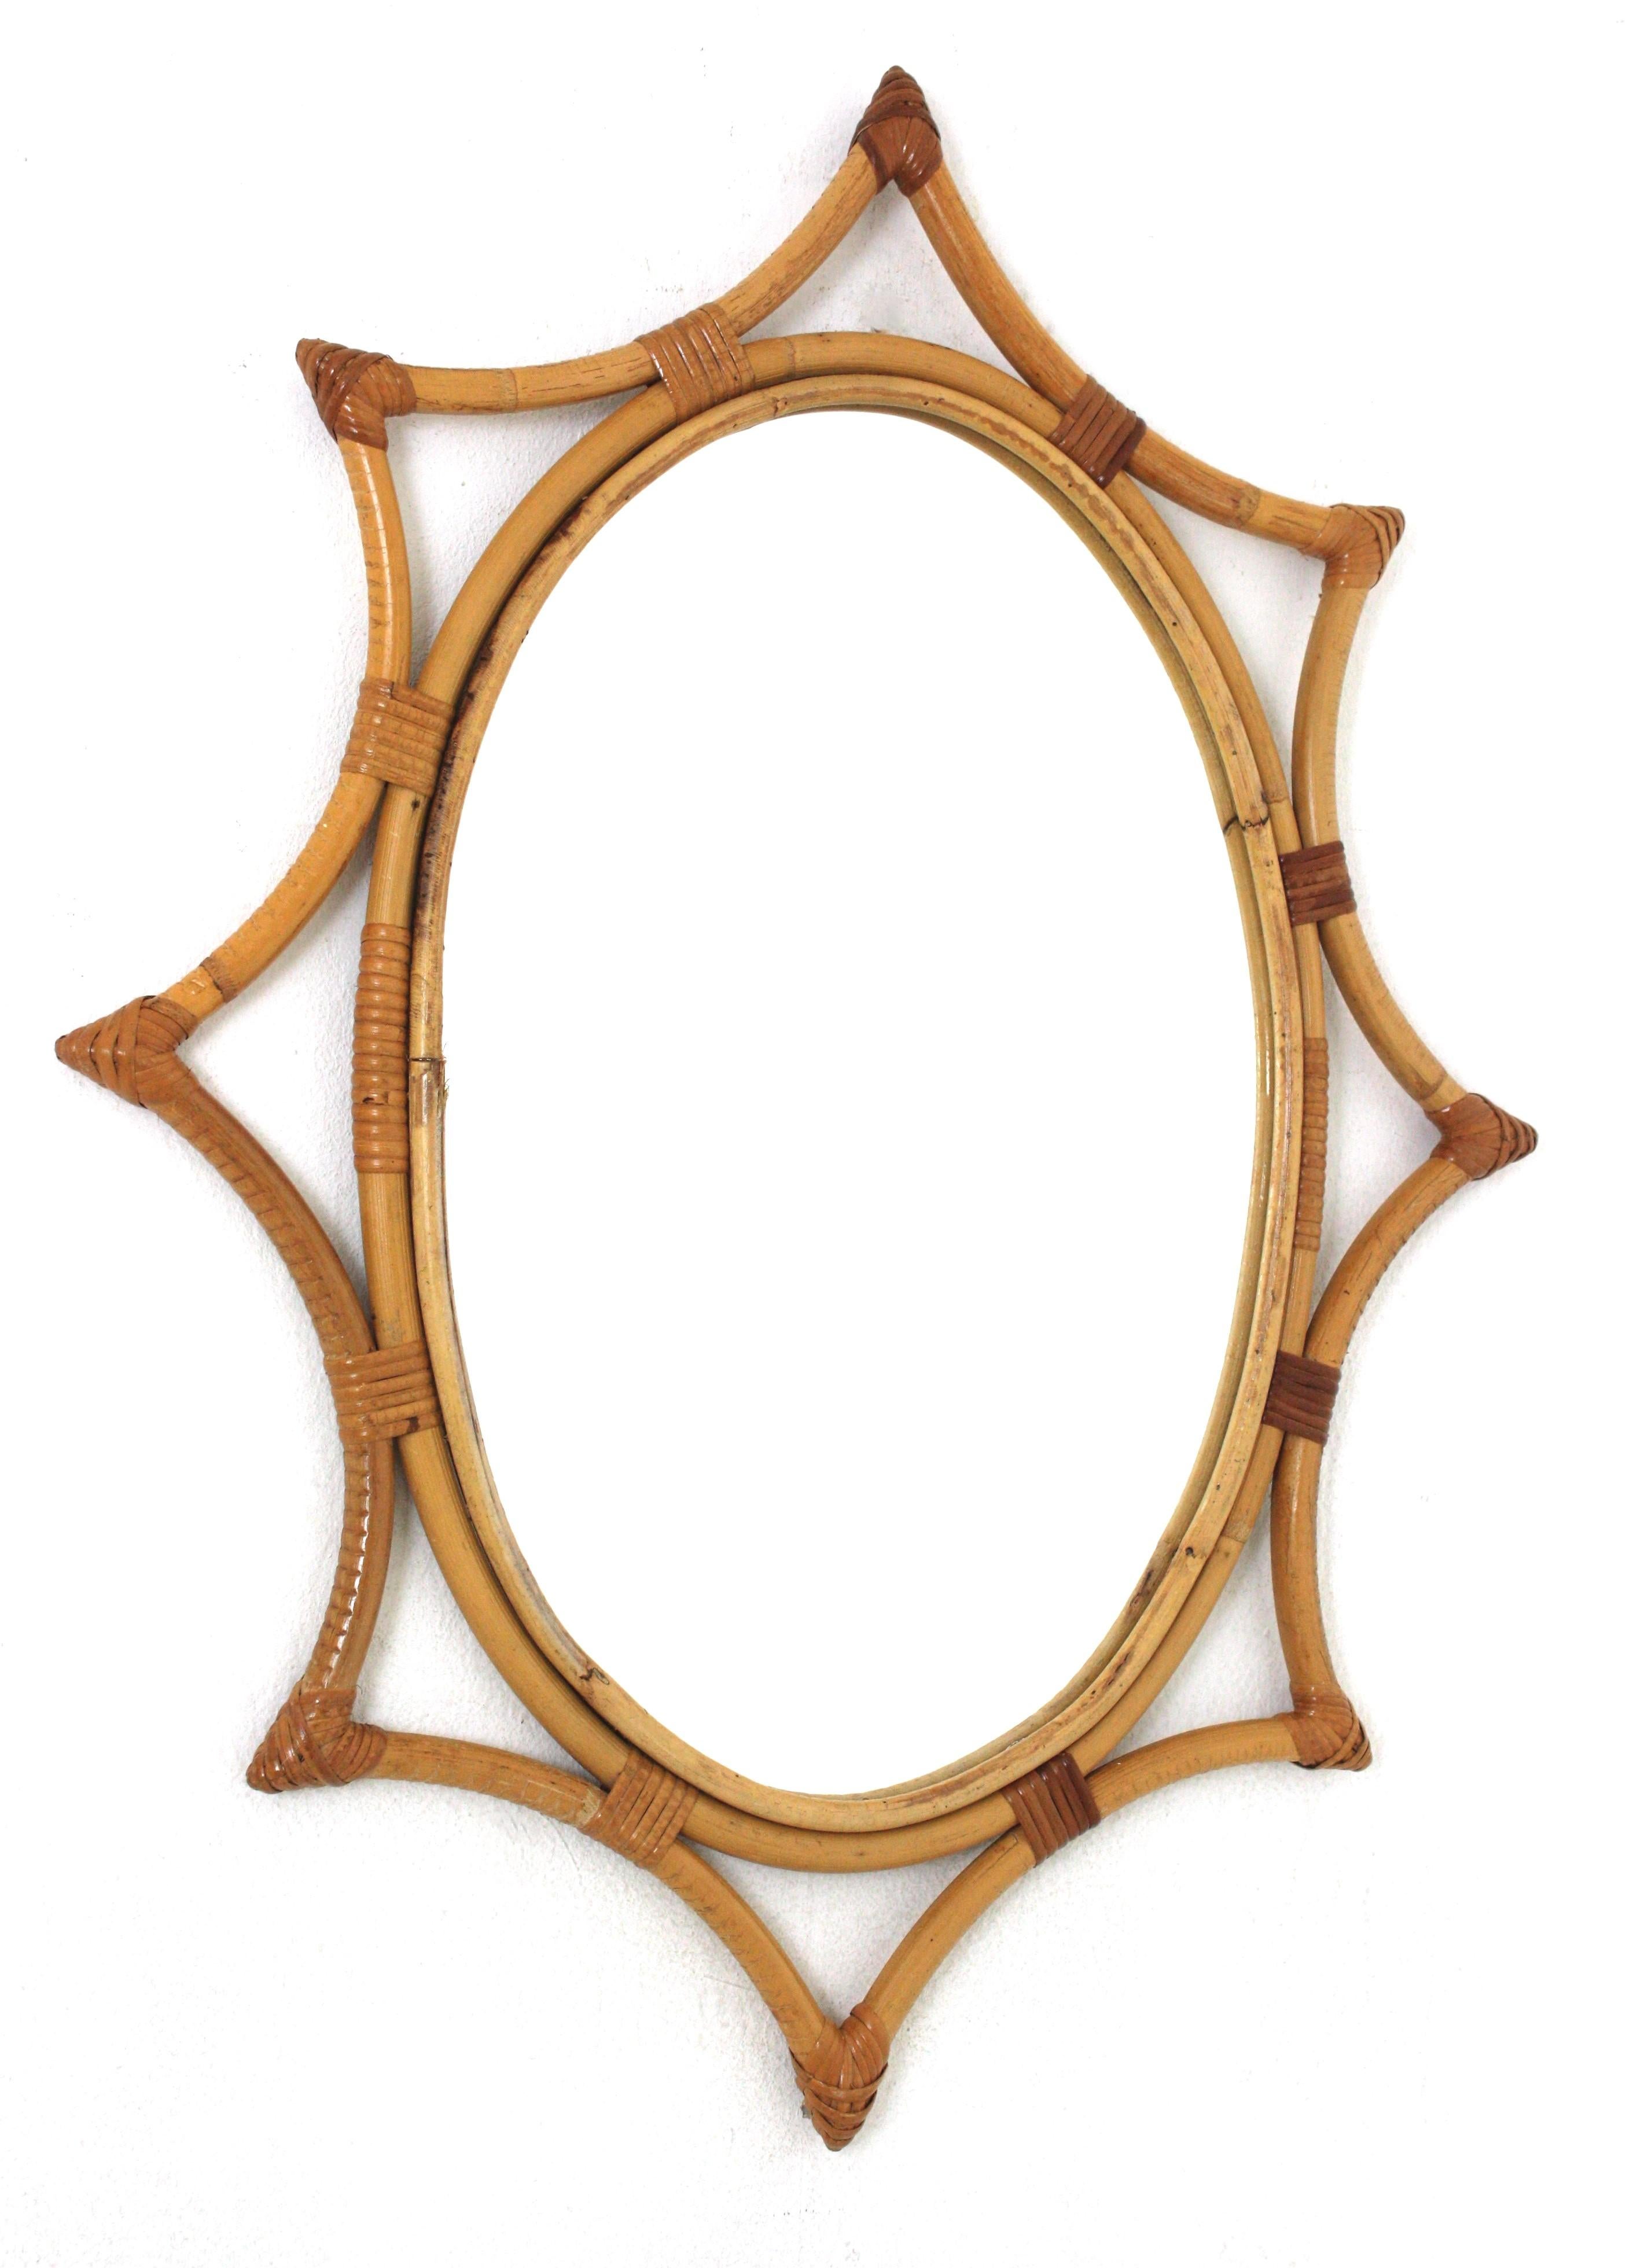 Oval Midcentury bamboo rattan sunburst starburst mirror. Spain, 1960s.
This wall mirror features an oval mirror glass framed by a bamboo star shaped frame with wicker /rattan tied accents.
Beautiful placed alone but also interesting as a part of a